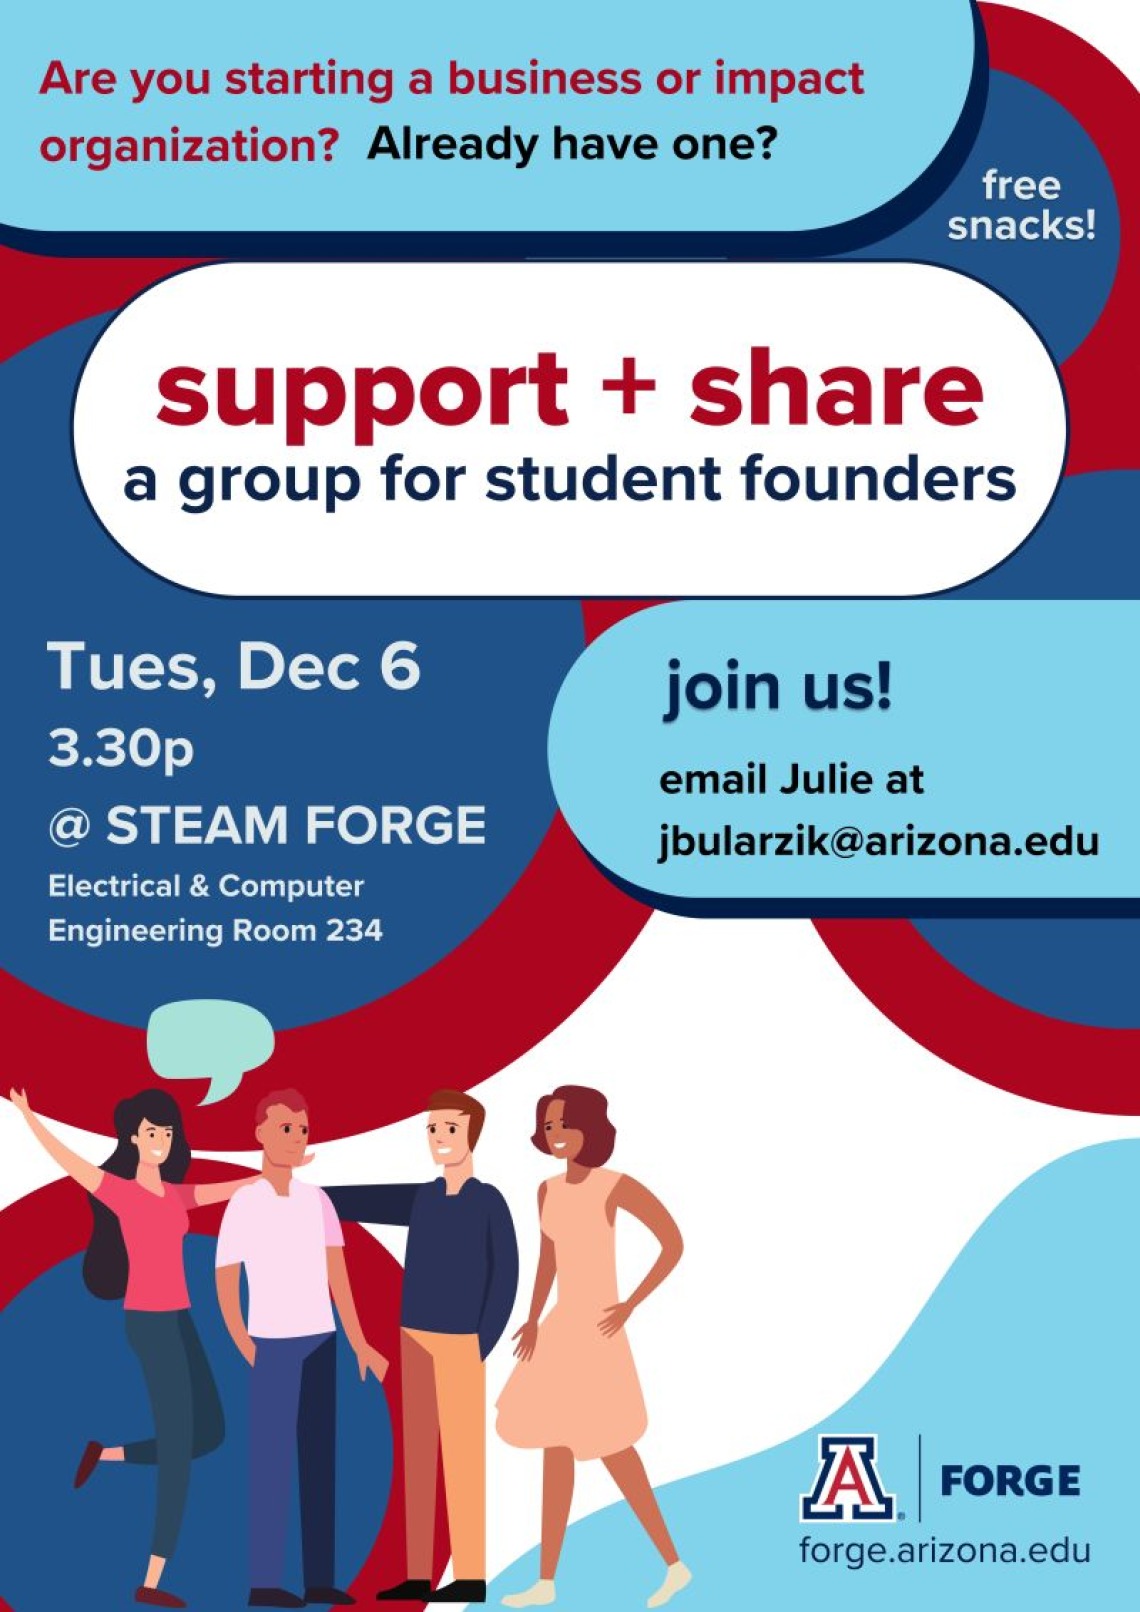 Support + Share a group of student founders. Tues, Dec 6, 3.30pm